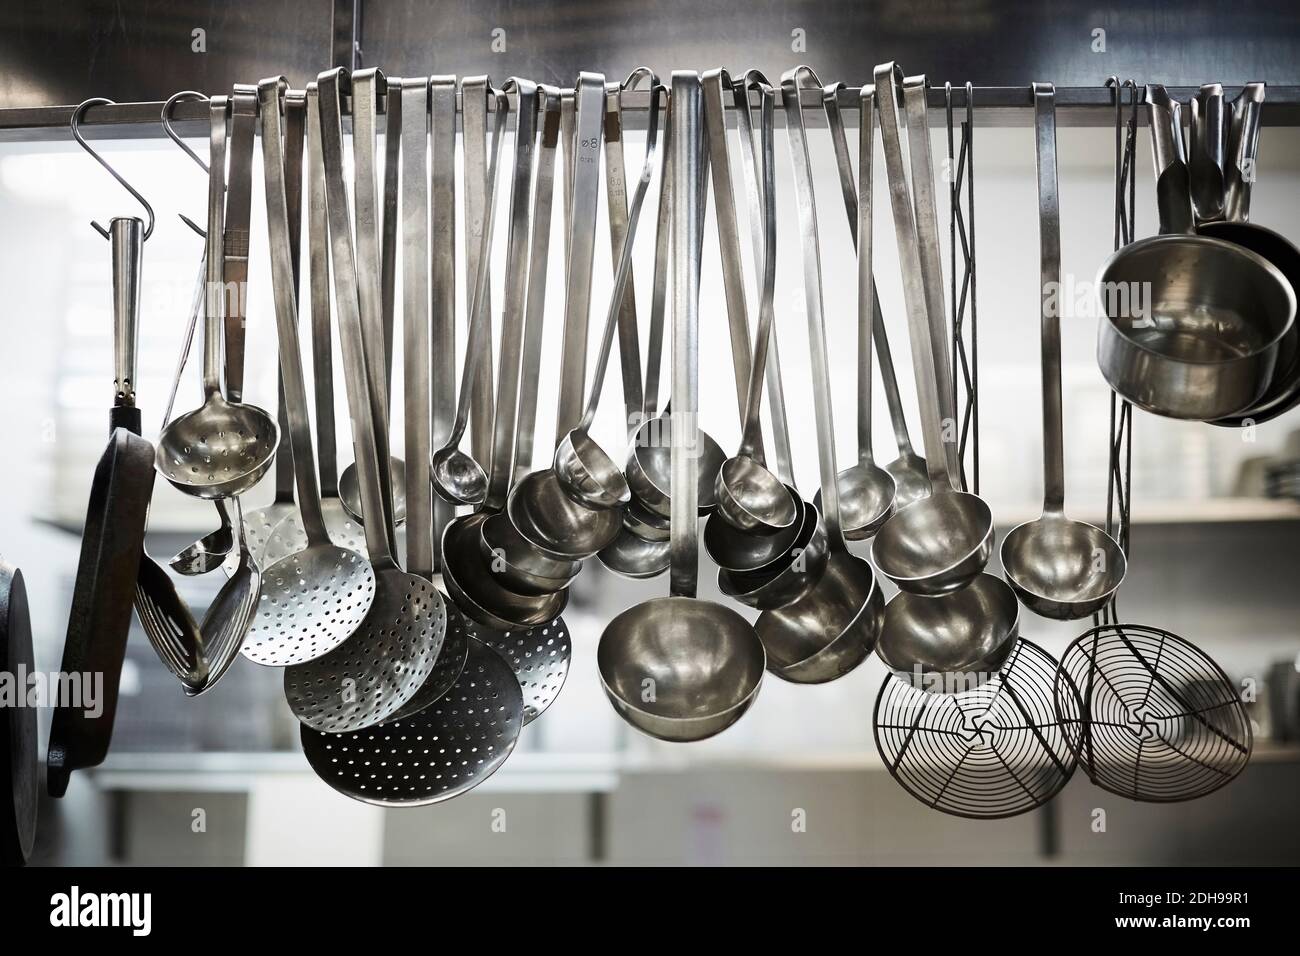 https://c8.alamy.com/comp/2DH99R1/utensils-on-metal-rack-in-commercial-kitchen-2DH99R1.jpg